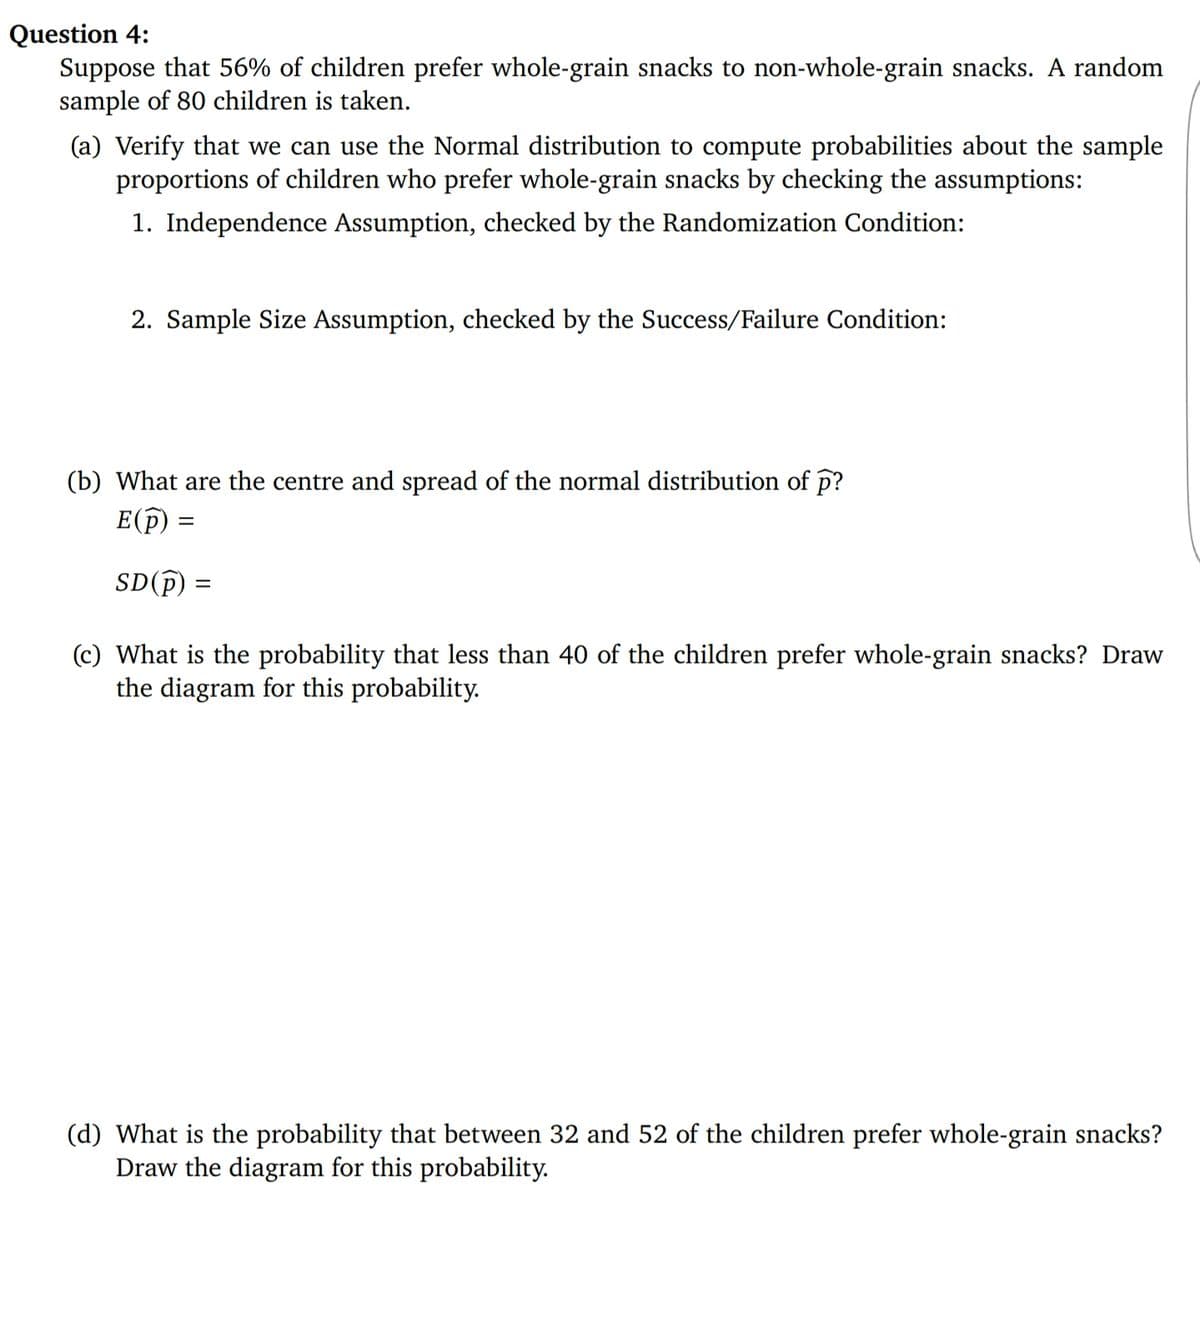 Question 4:
Suppose that 56% of children prefer whole-grain snacks to non-whole-grain snacks. A random
sample of 80 children is taken.
(a) Verify that we can use the Normal distribution to compute probabilities about the sample
proportions of children who prefer whole-grain snacks by checking the assumptions:
1. Independence Assumption, checked by the Randomization Condition:
2. Sample Size Assumption, checked by the Success/Failure Condition:
(b) What are the centre and spread of the normal distribution of p?
E(p) =
SD(f)
(c) What is the probability that less than 40 of the children prefer whole-grain snacks? Draw
the diagram for this probability.
(d) What is the probability that between 32 and 52 of the children prefer whole-grain snacks?
Draw the diagram for this probability.
